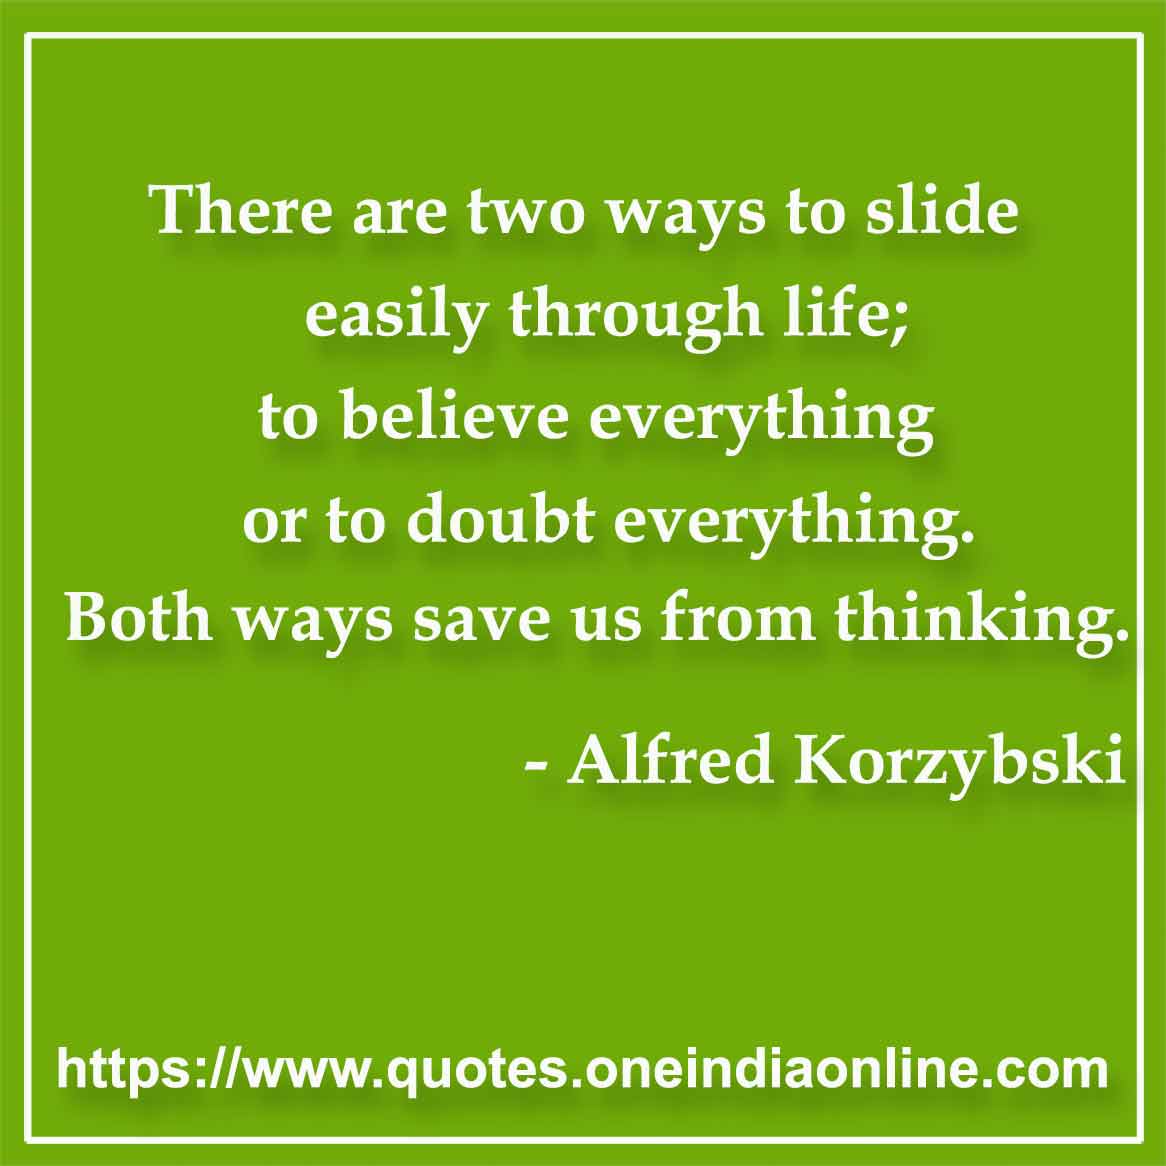 There are two ways to slide easily through life; to believe everything or to doubt everything. Both ways save us from thinking.

- Doubt Quotes by Alfred Korzybski 